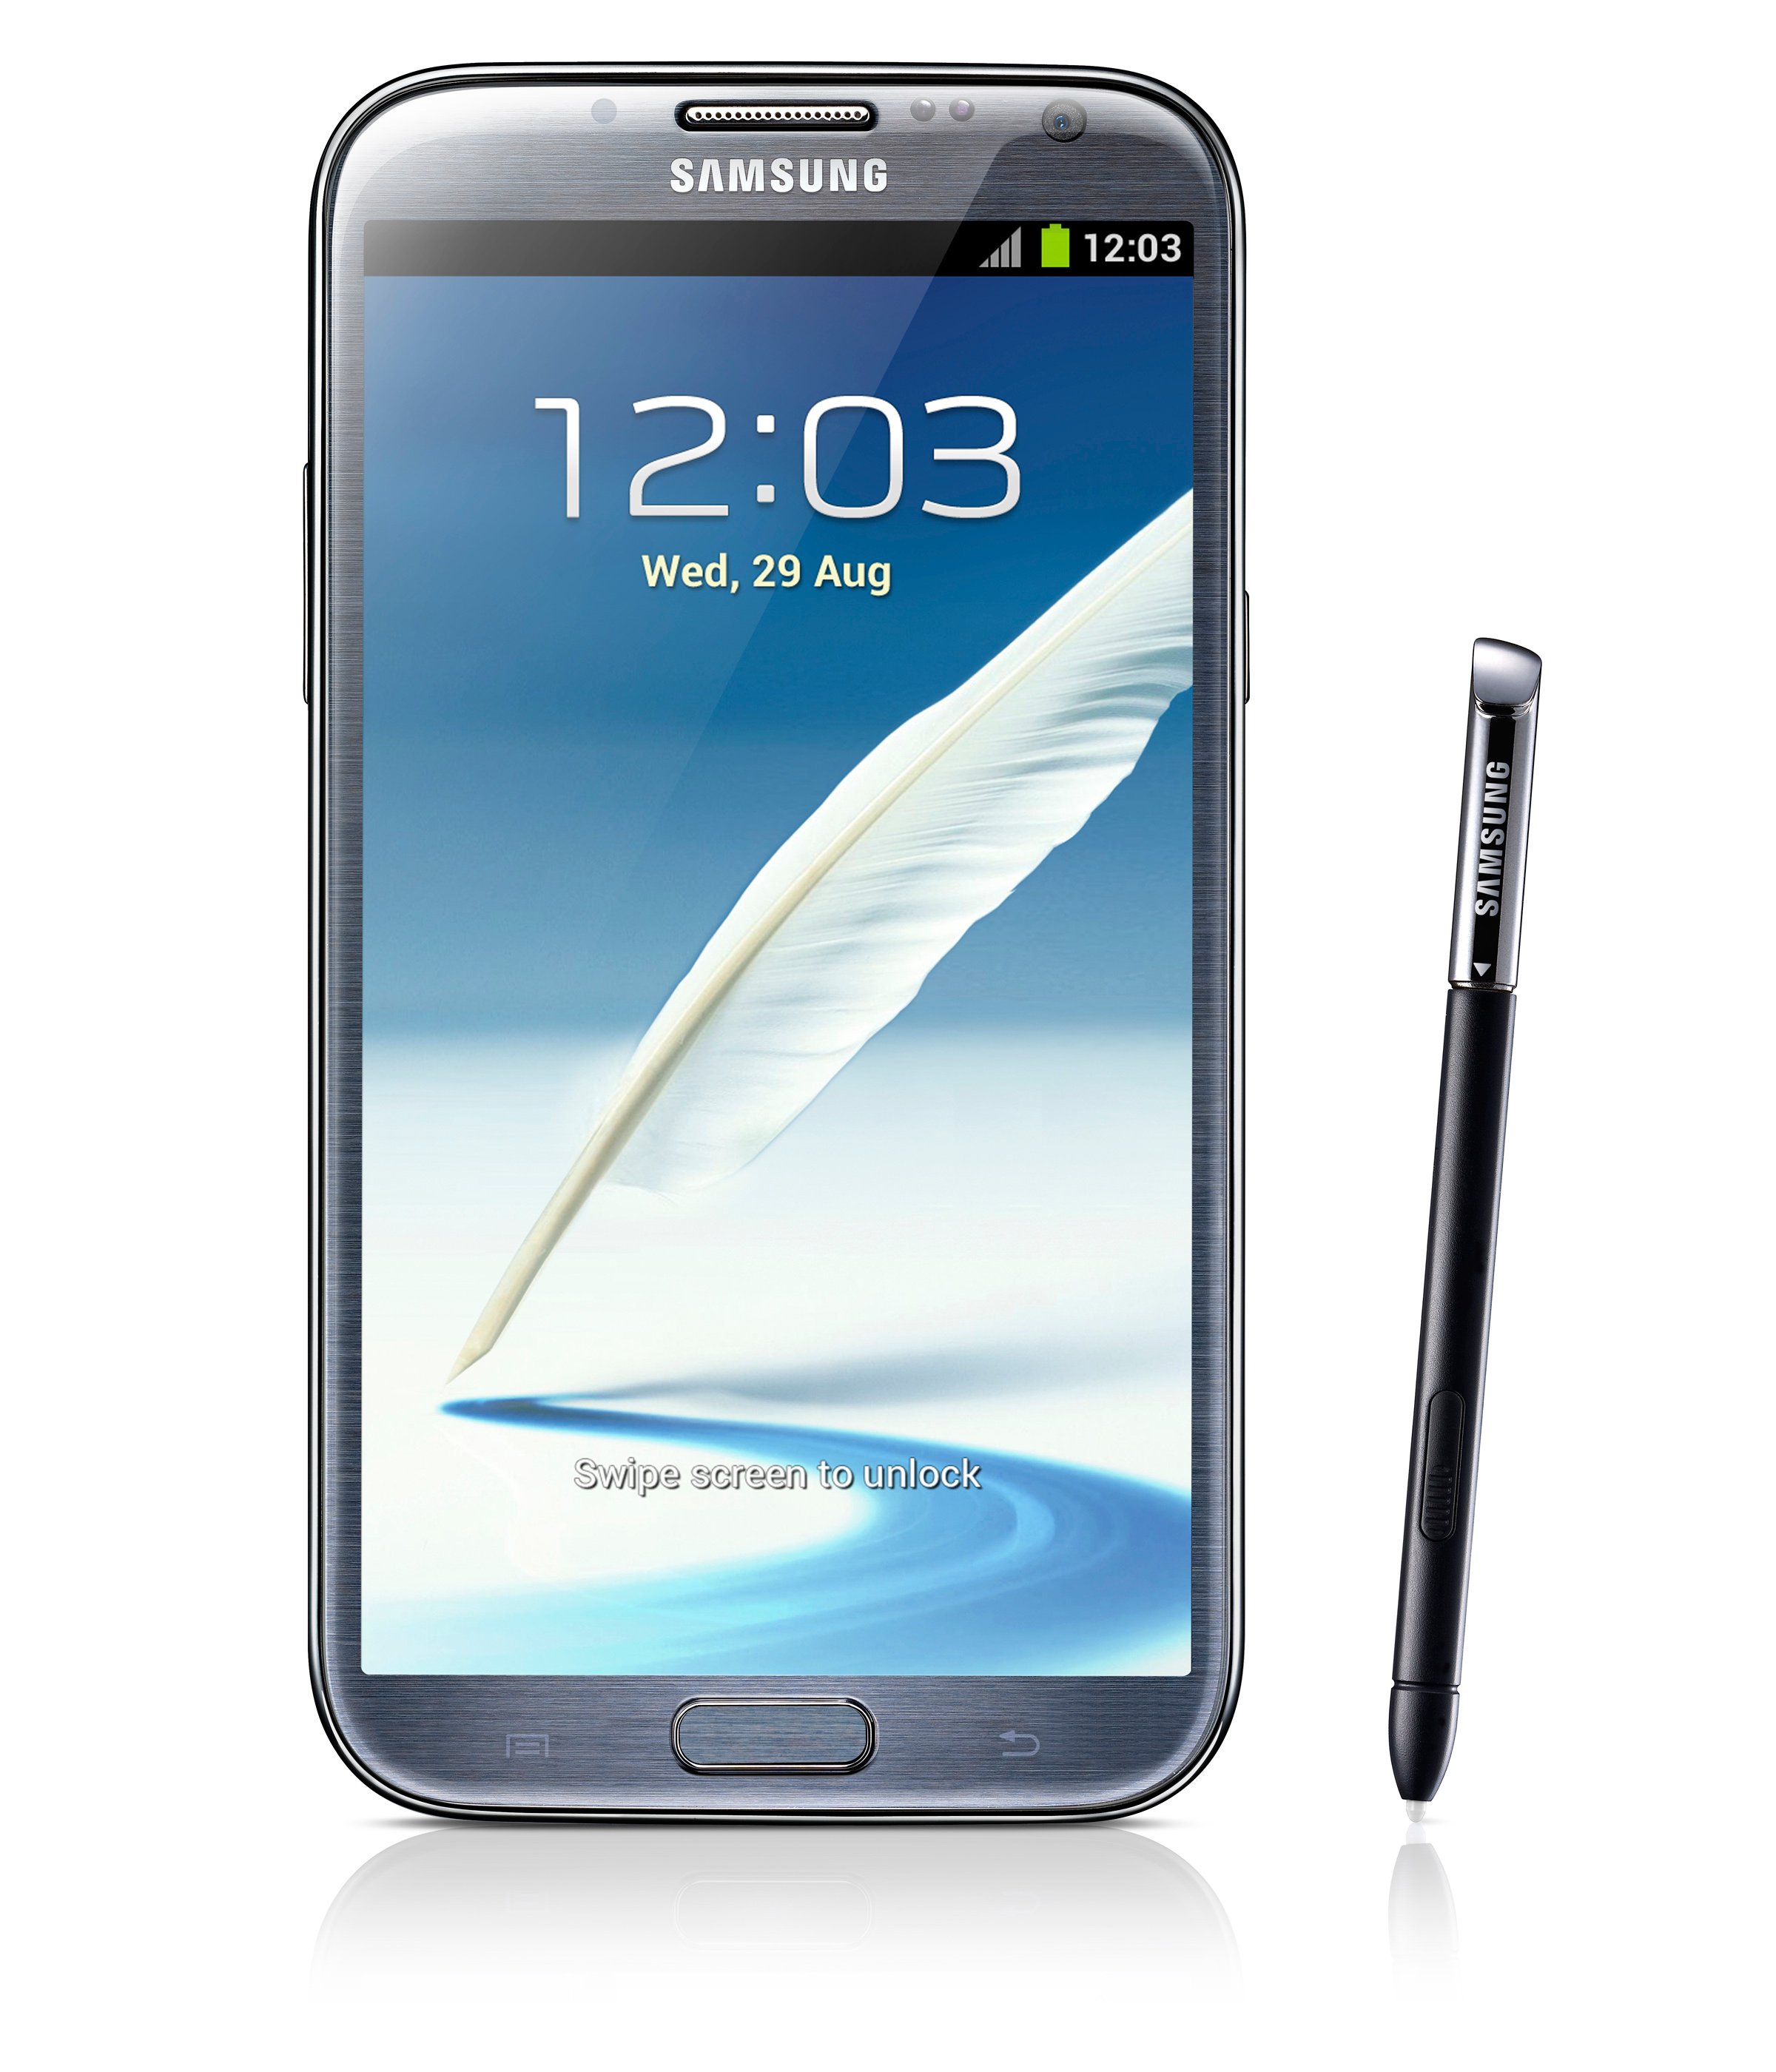 Official Samsung Galaxy Note II Specifications, Images ...